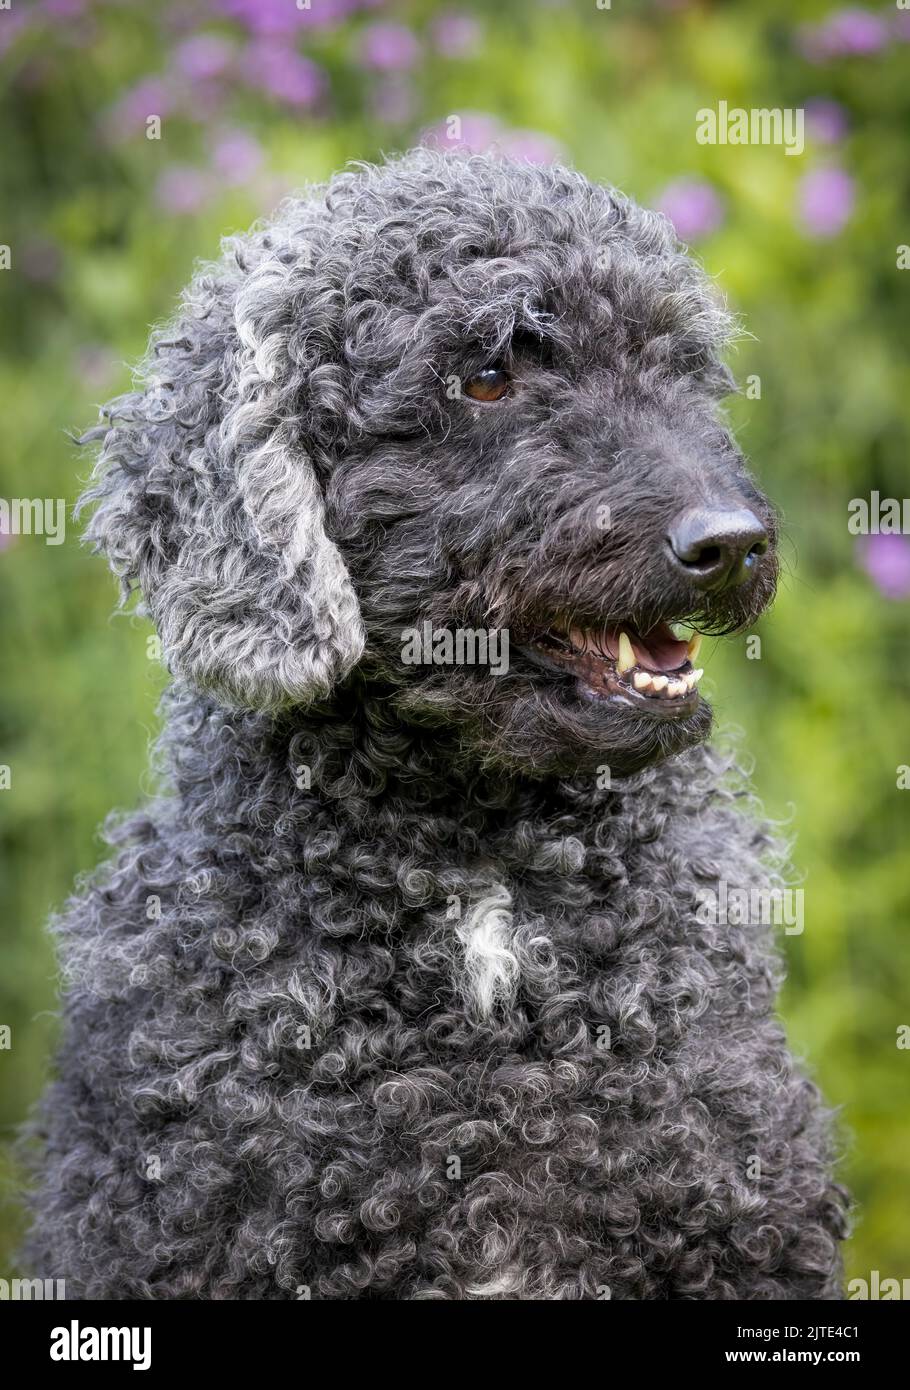 A beautiful curly haired grey and black Labradoodle dog, looking towards the front with mouth open Stock Photo